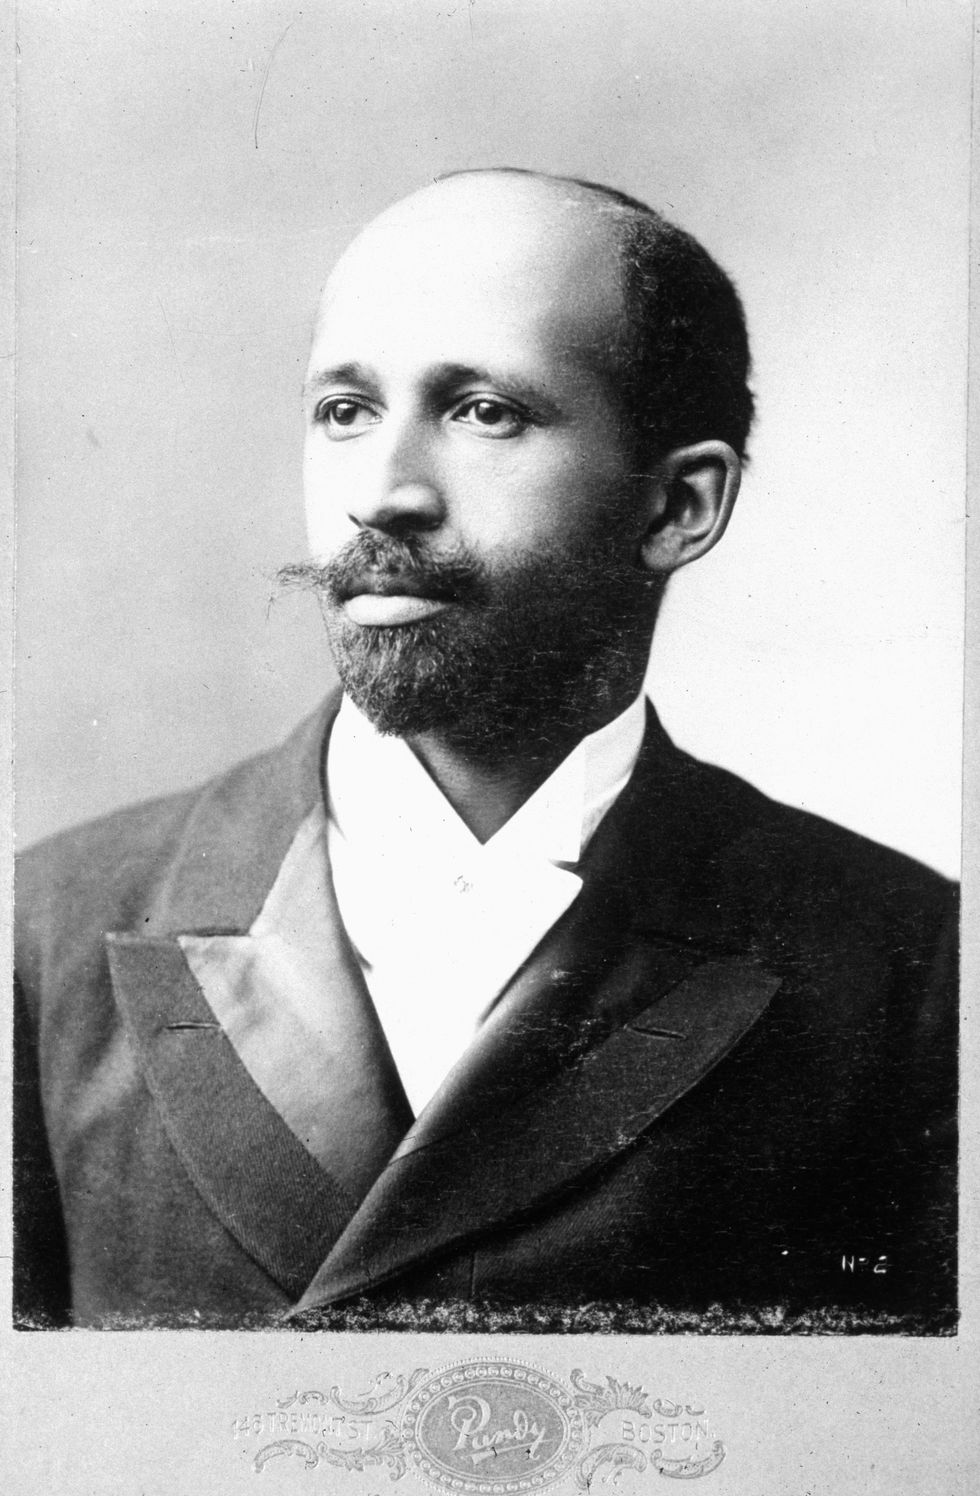 Civil Rights Activists: Prior to the Civil Rights Movement, scholar W.E.B. Du Bois fought for racial equality as a founding member of the National Association for the Advancement of Colored People. (Photo by MPI/Getty Images)